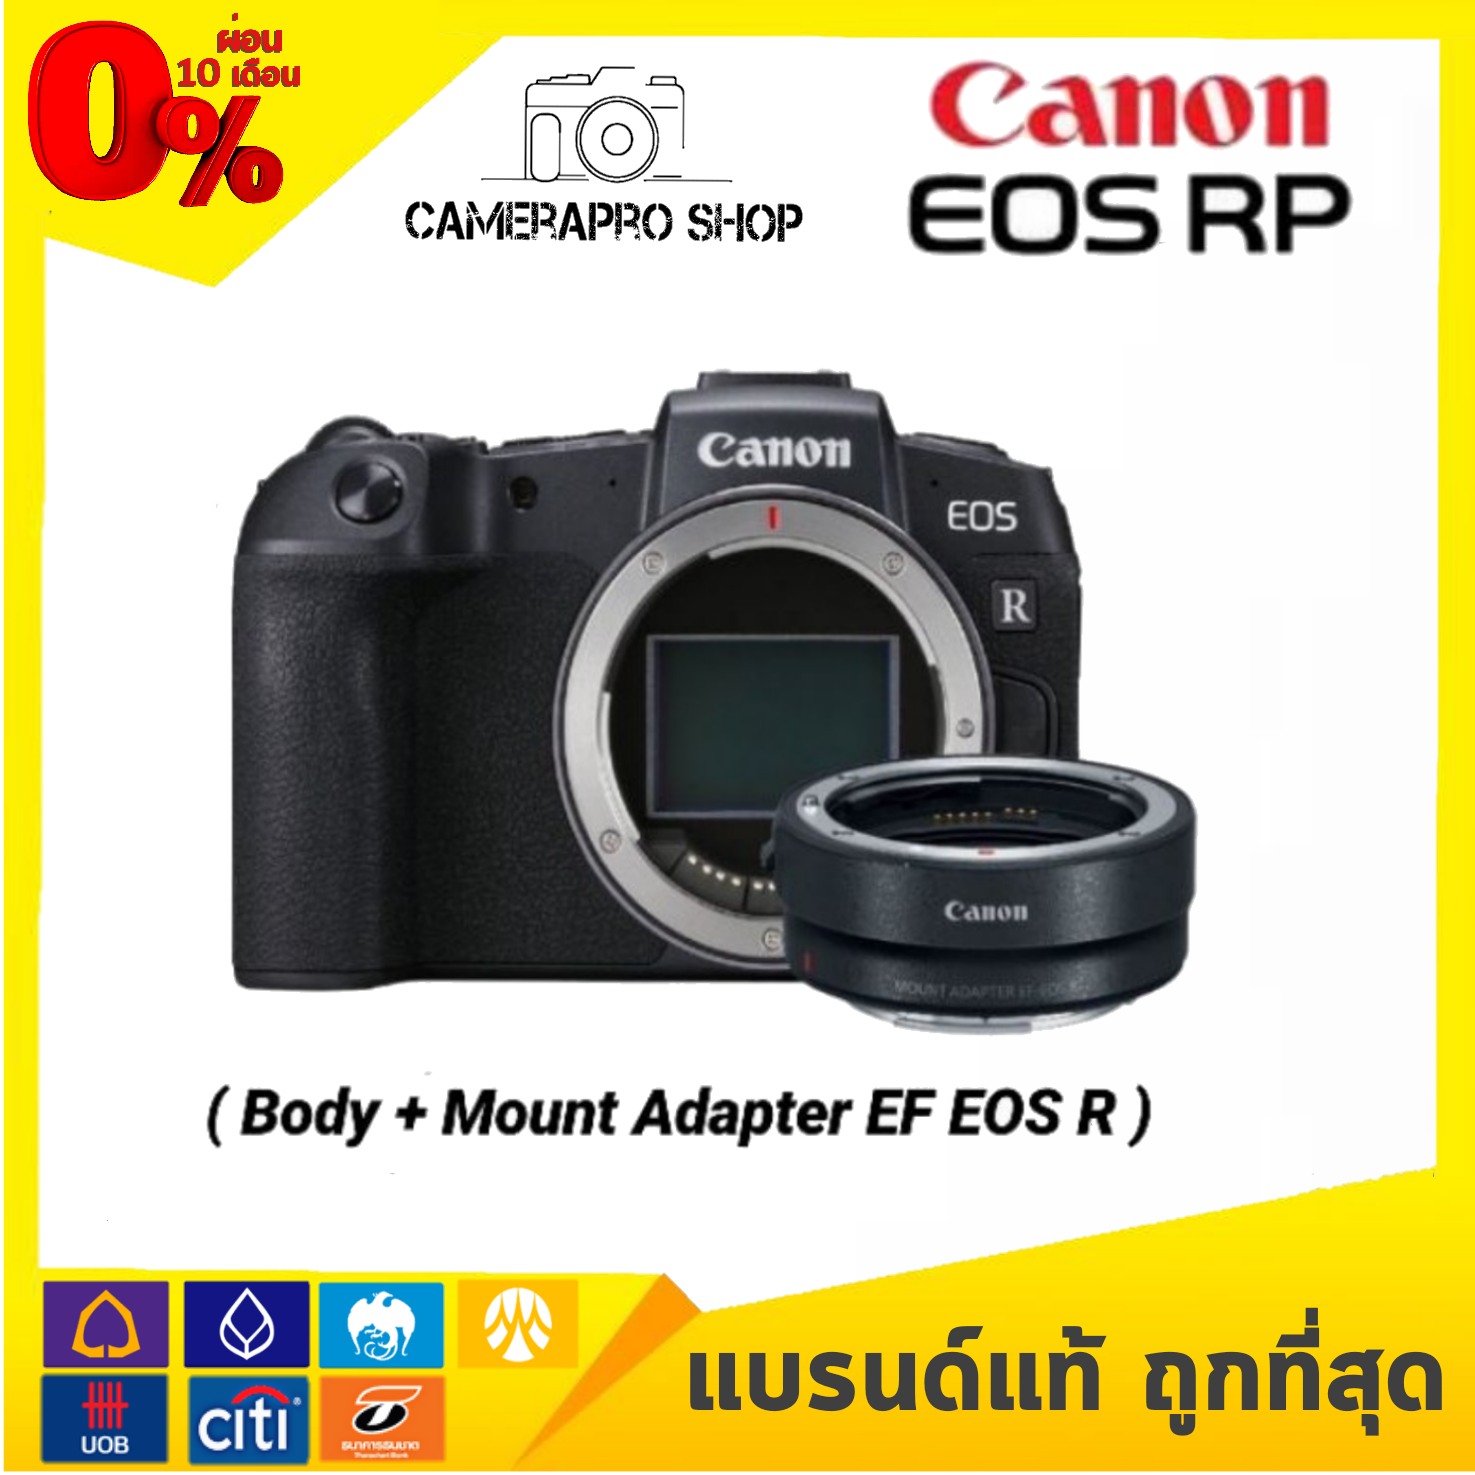 Canon Camera EOS RP (Body) + Adapter R เมนูไทย(รับประกัน 1 ปี By Cameraproshop)